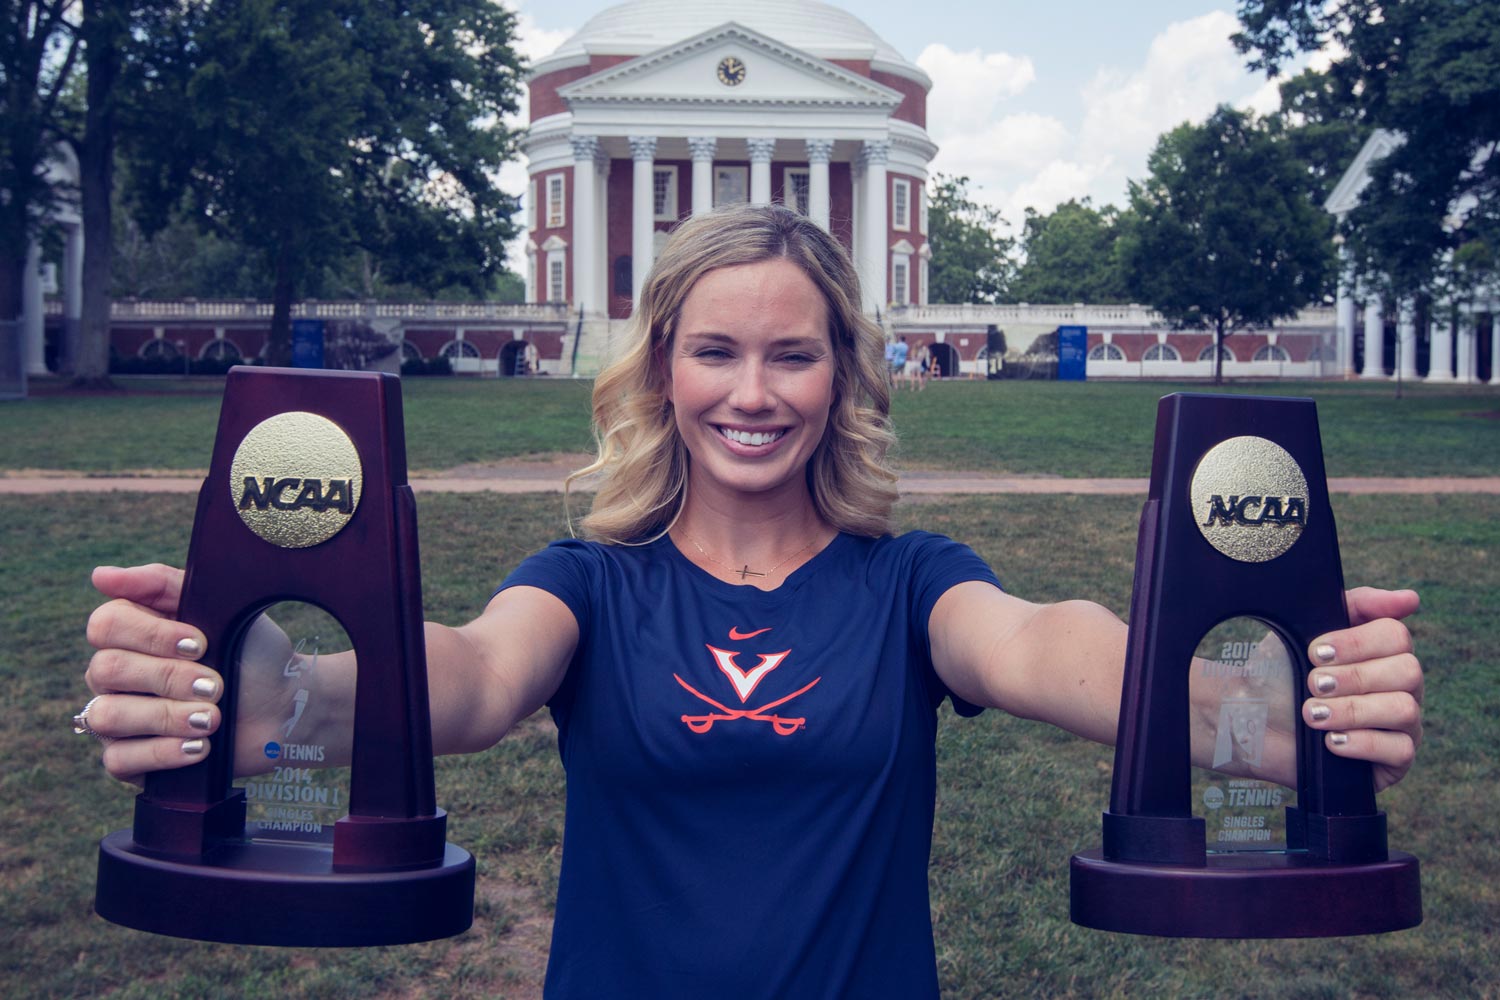 Danielle Collins holds her two Tennis NCAA awards in front of the Rotunda